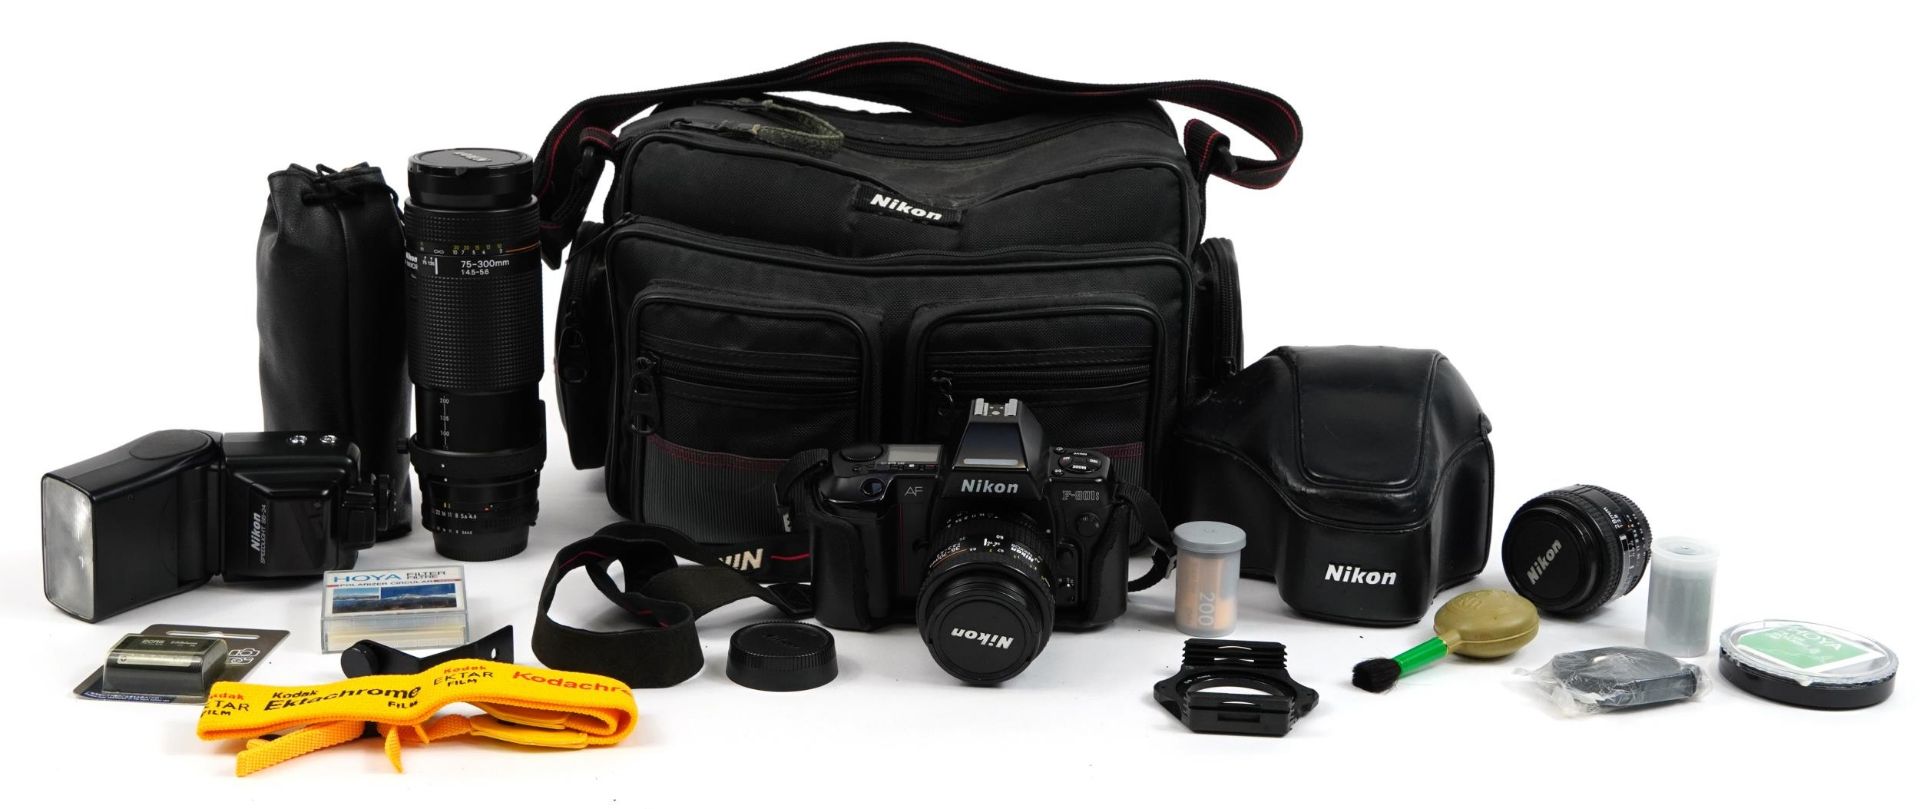 Nikon F-801S camera with lenses and accessories including 28mm lens and 75-300mm lens